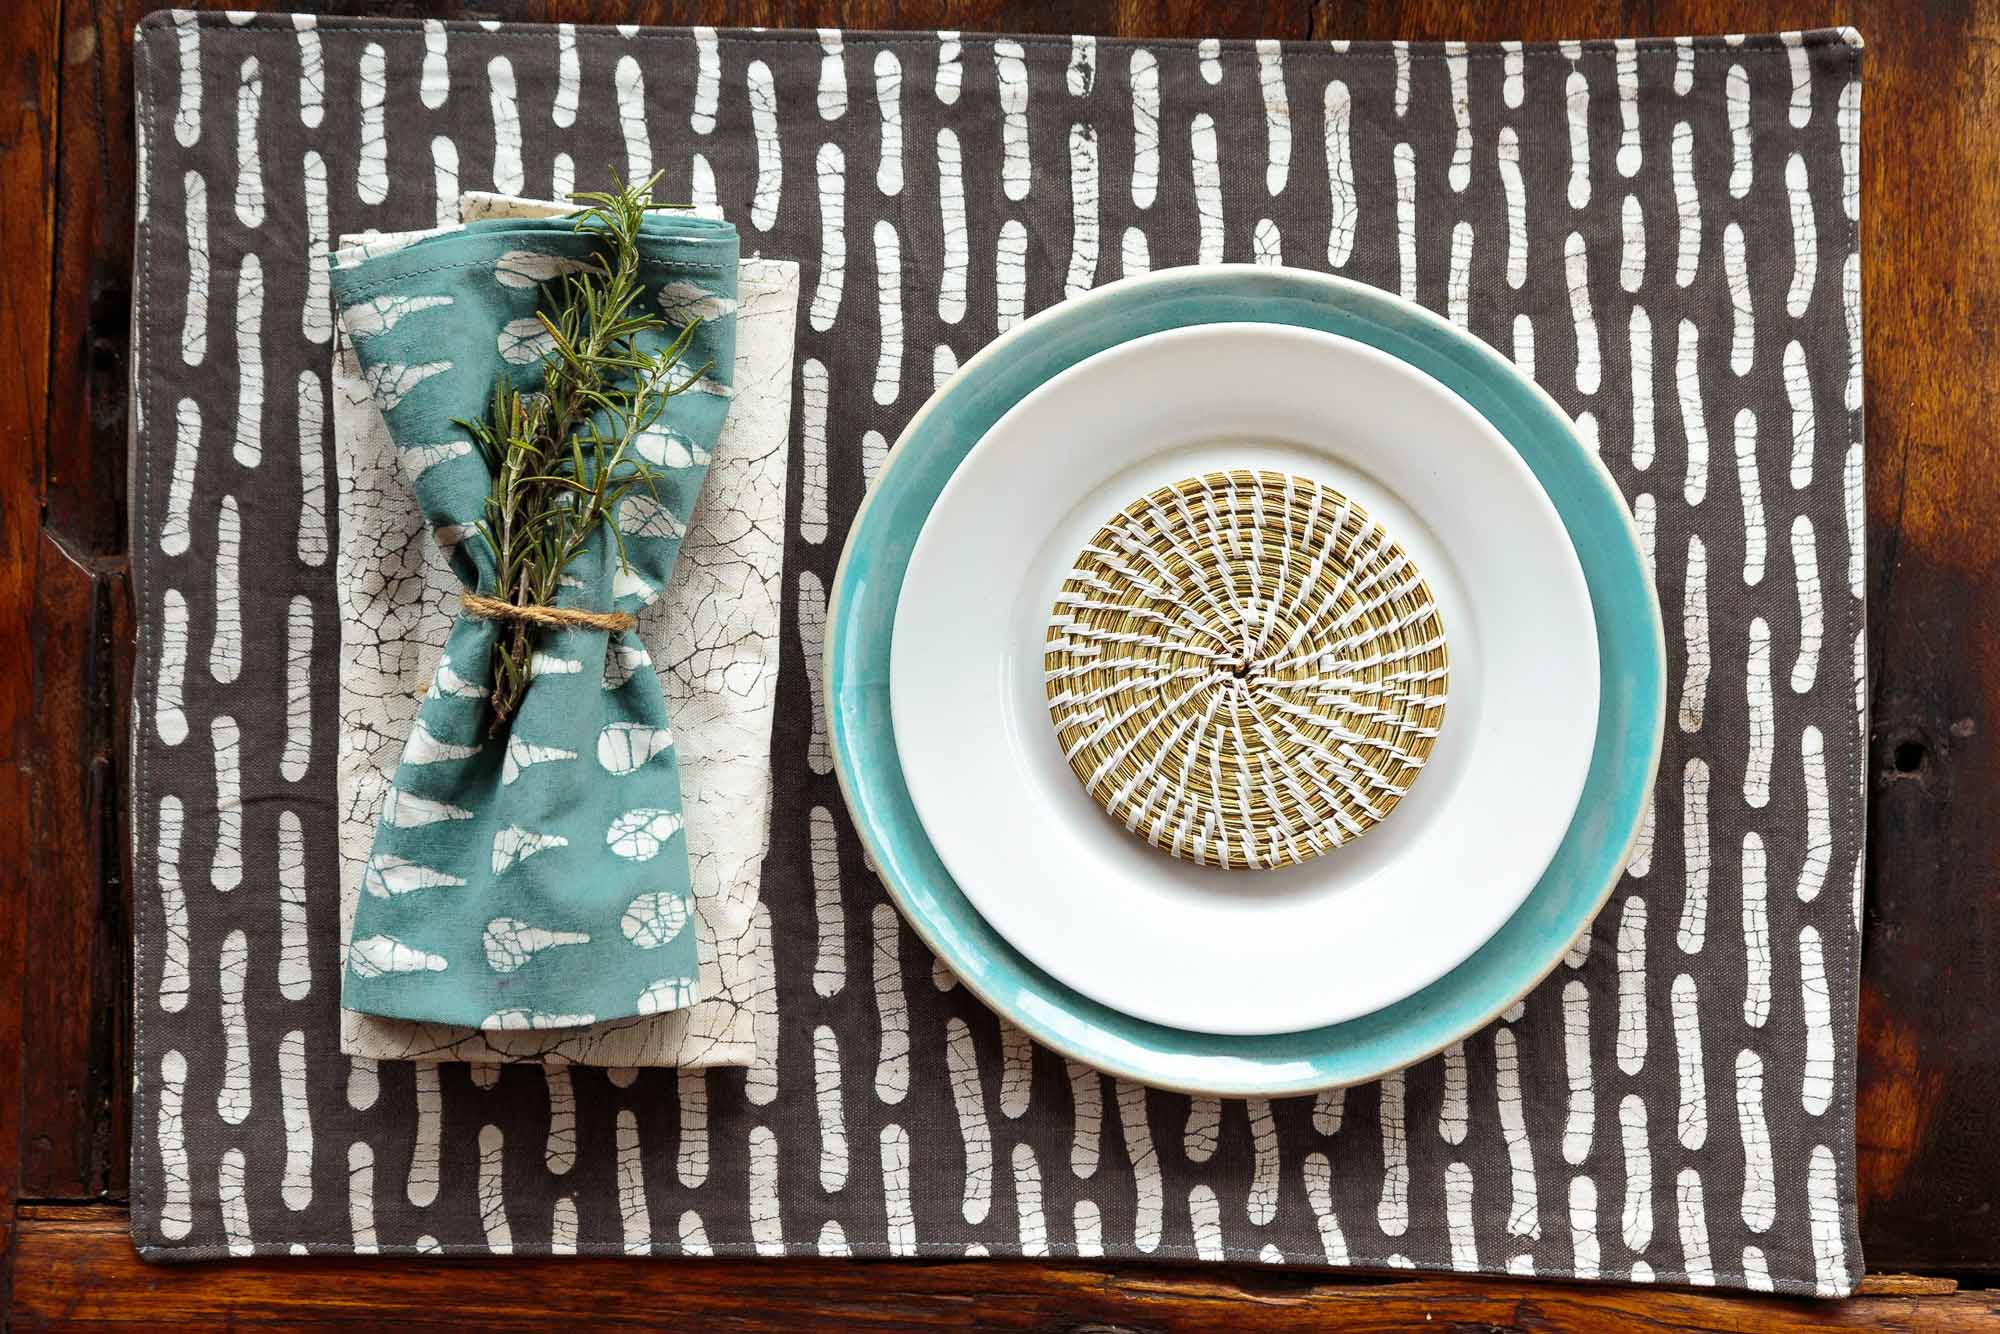 Boho Teal Drops Napkin Set - Hand Painted by TRIBAL TEXTILES - Handcrafted Home Decor Interiors - African Made